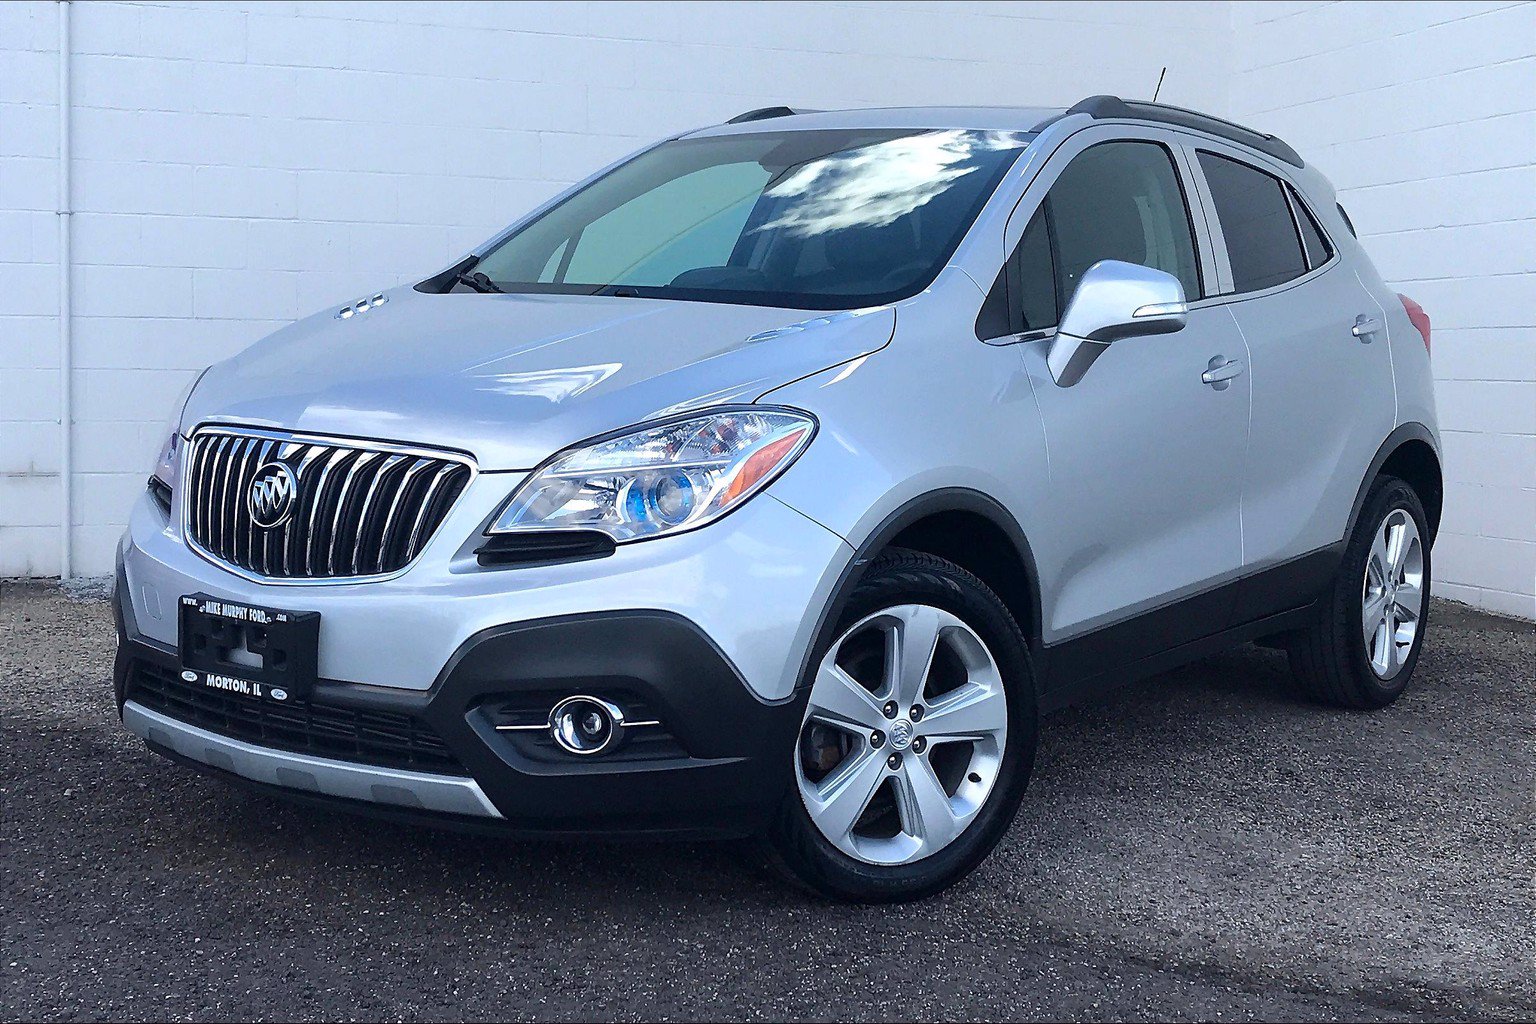 PreOwned 2016 Buick Encore AWD 4dr Convenience 4D Sport Utility in